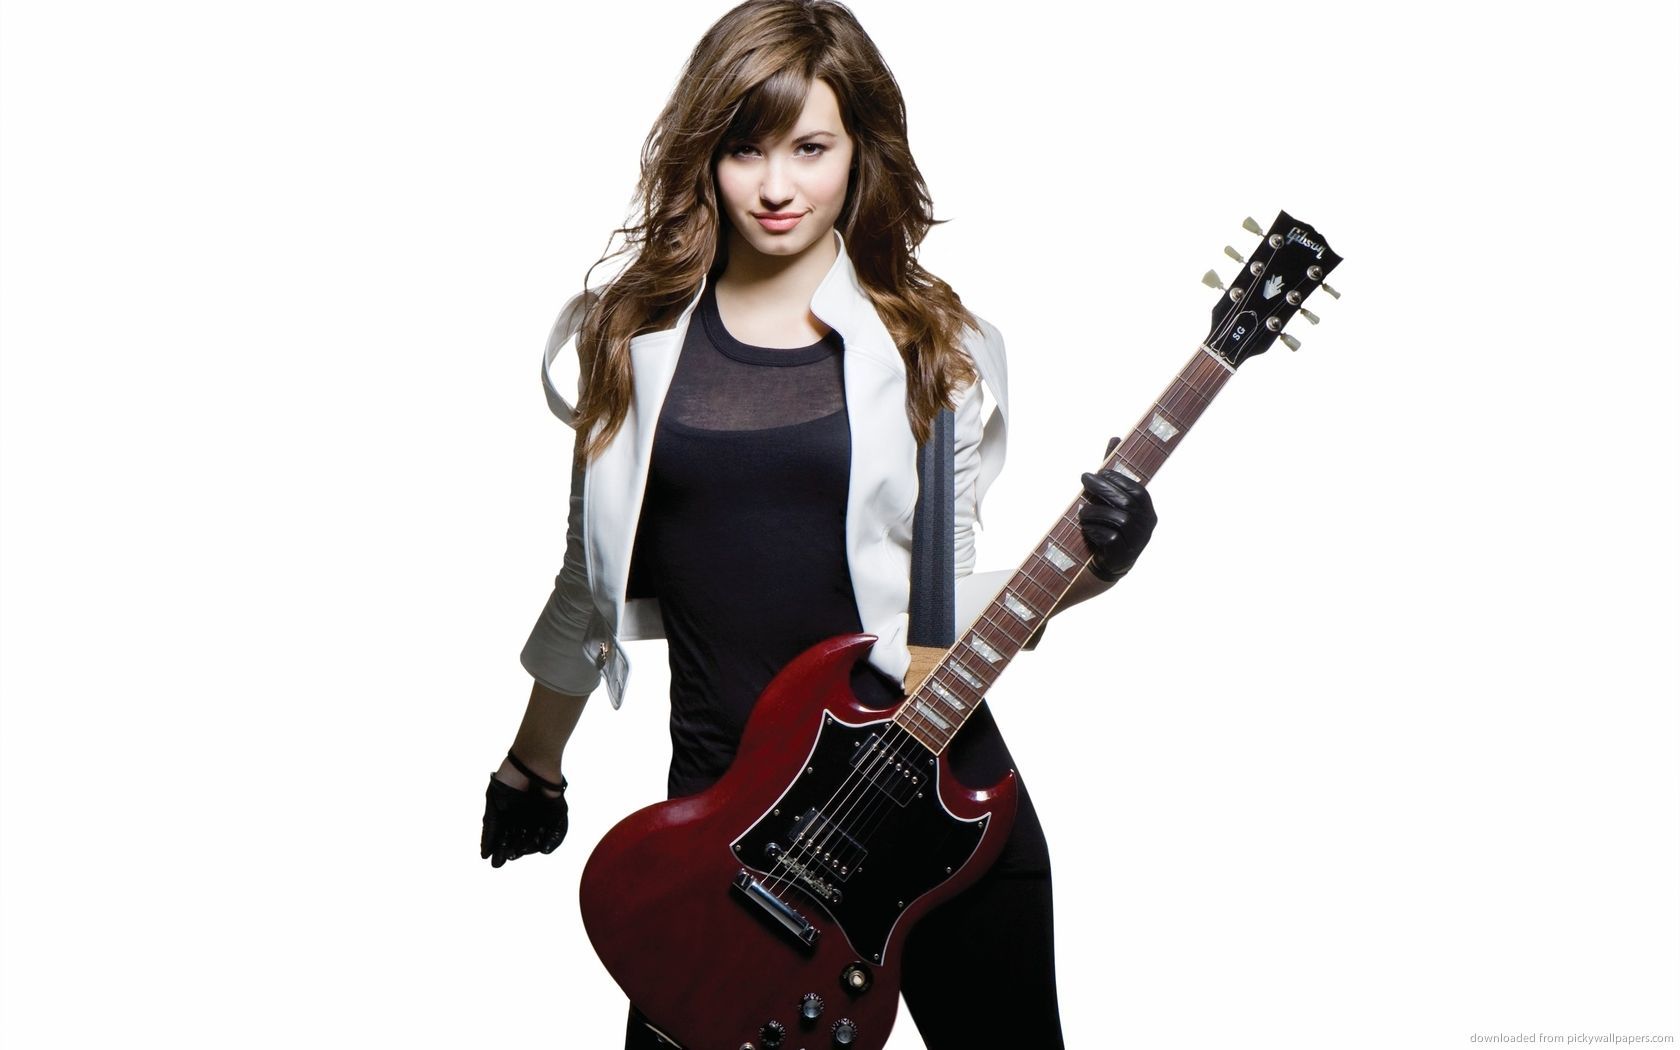 Download 1680x1050 Demi Lovato With Red Guitar Wallpaper